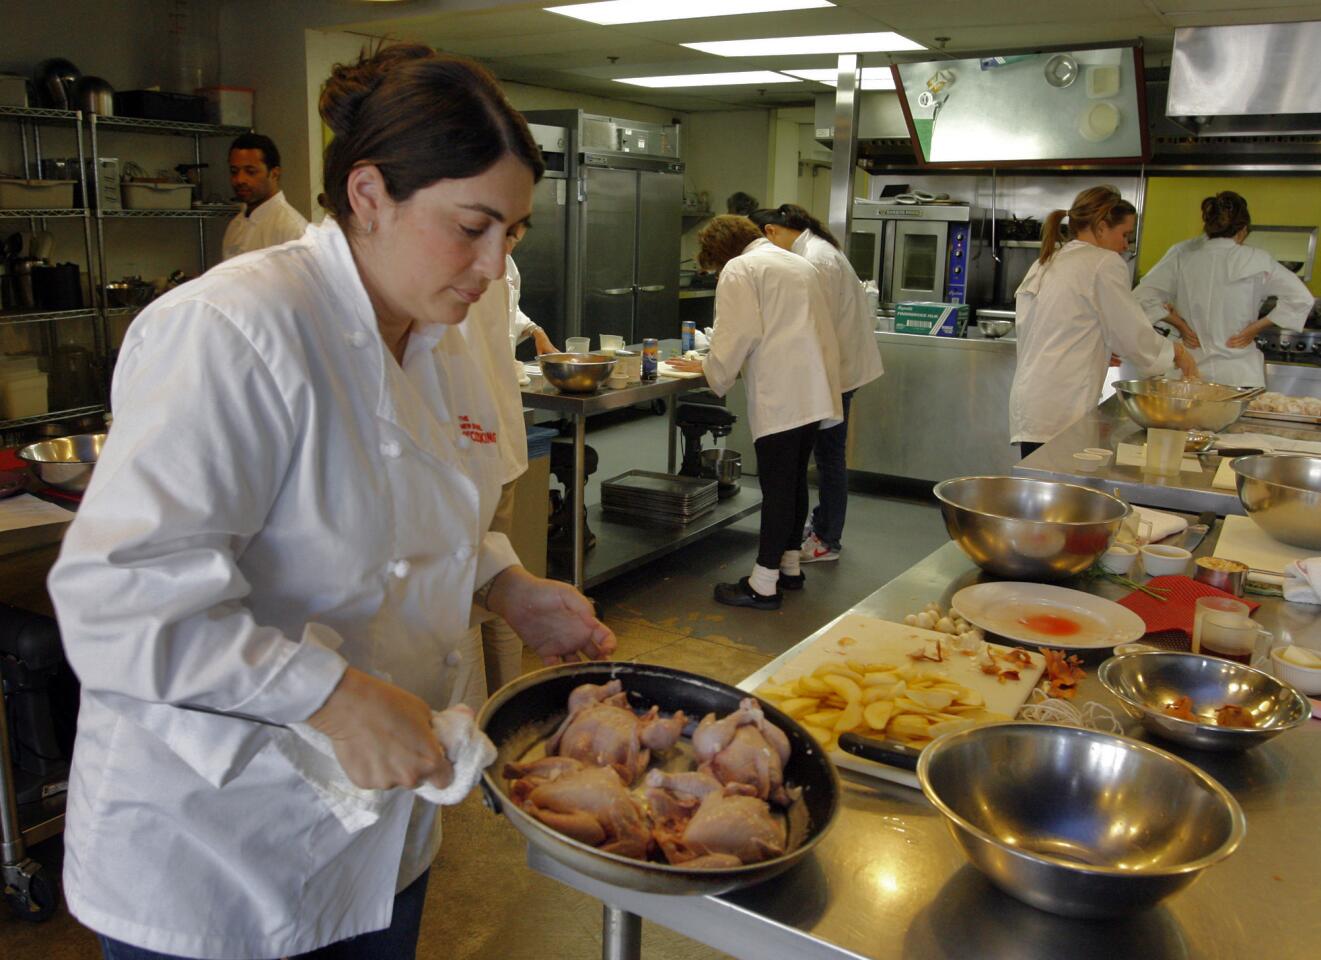 Students at The New School of Cooking in Culver City